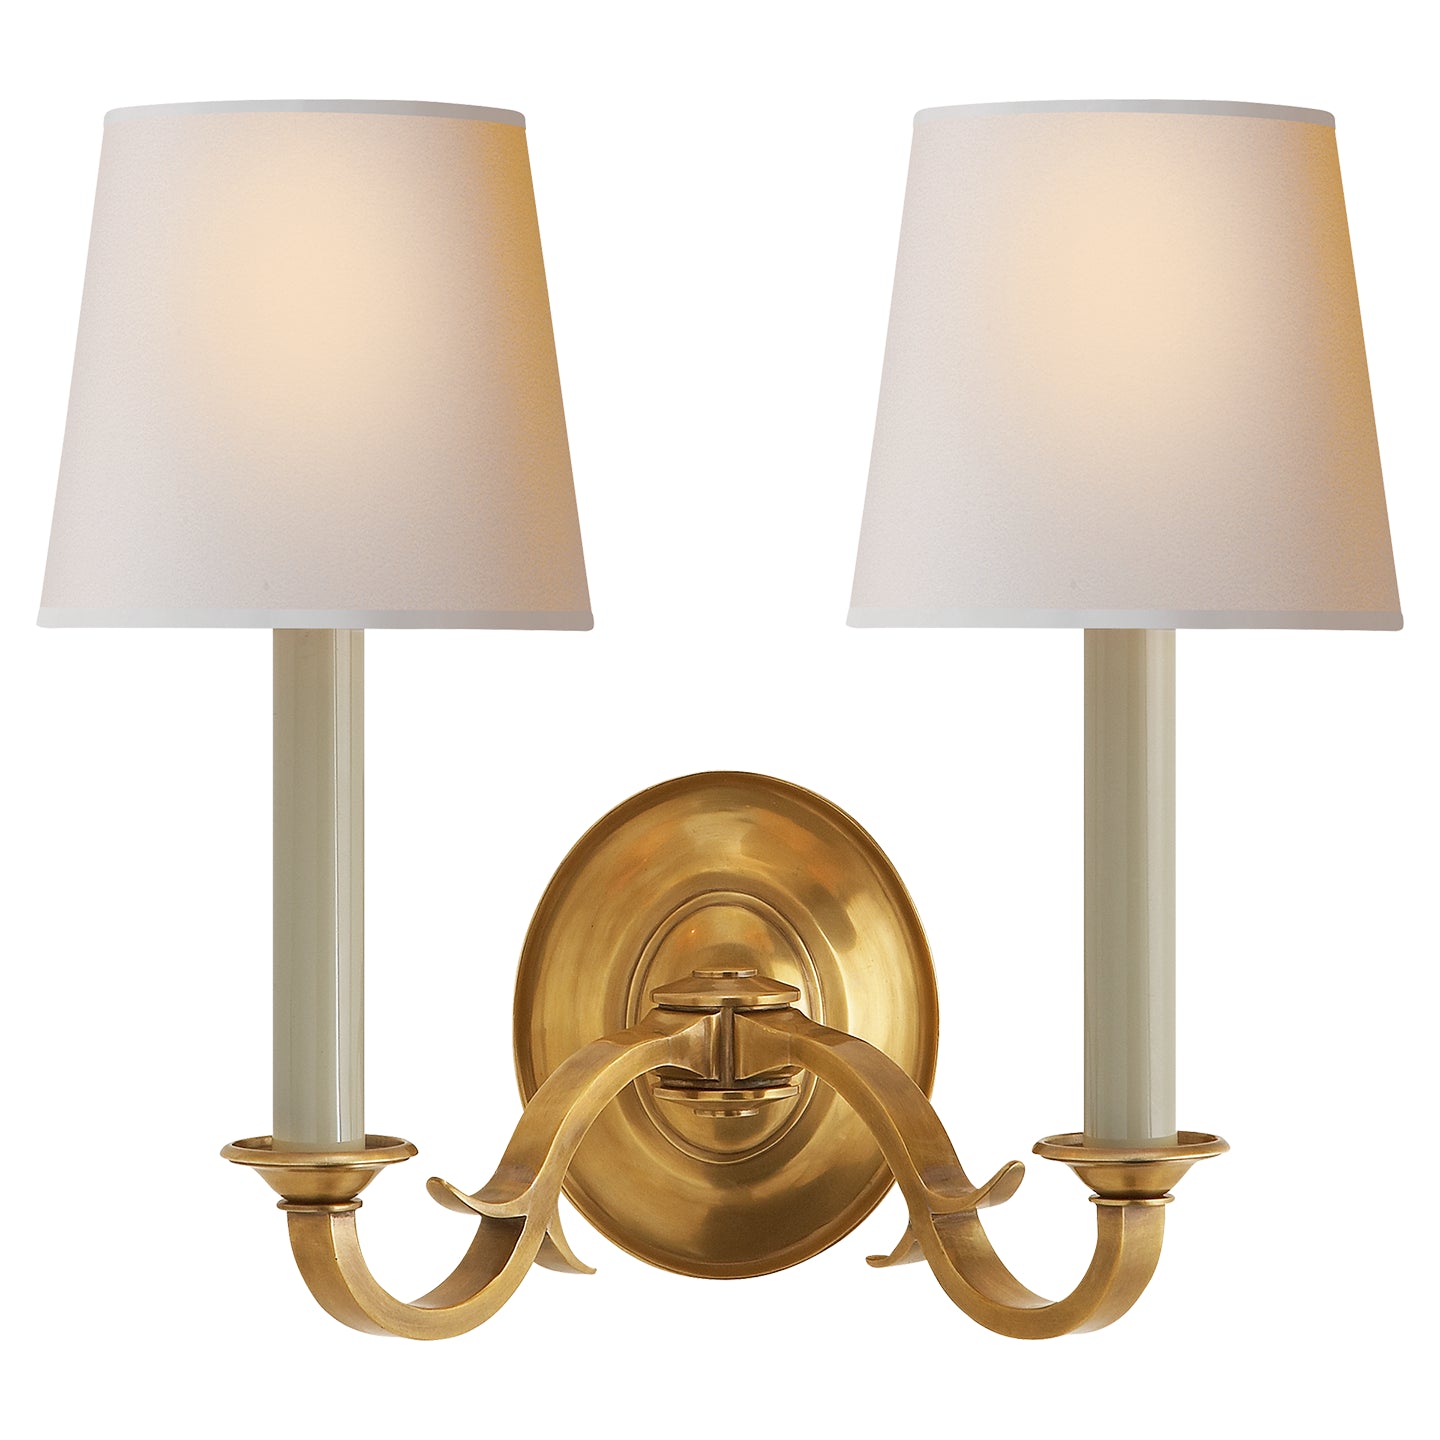 Visual Comfort Signature - TOB 2121HAB-NP - Two Light Wall Sconce - Channing - Hand-Rubbed Antique Brass